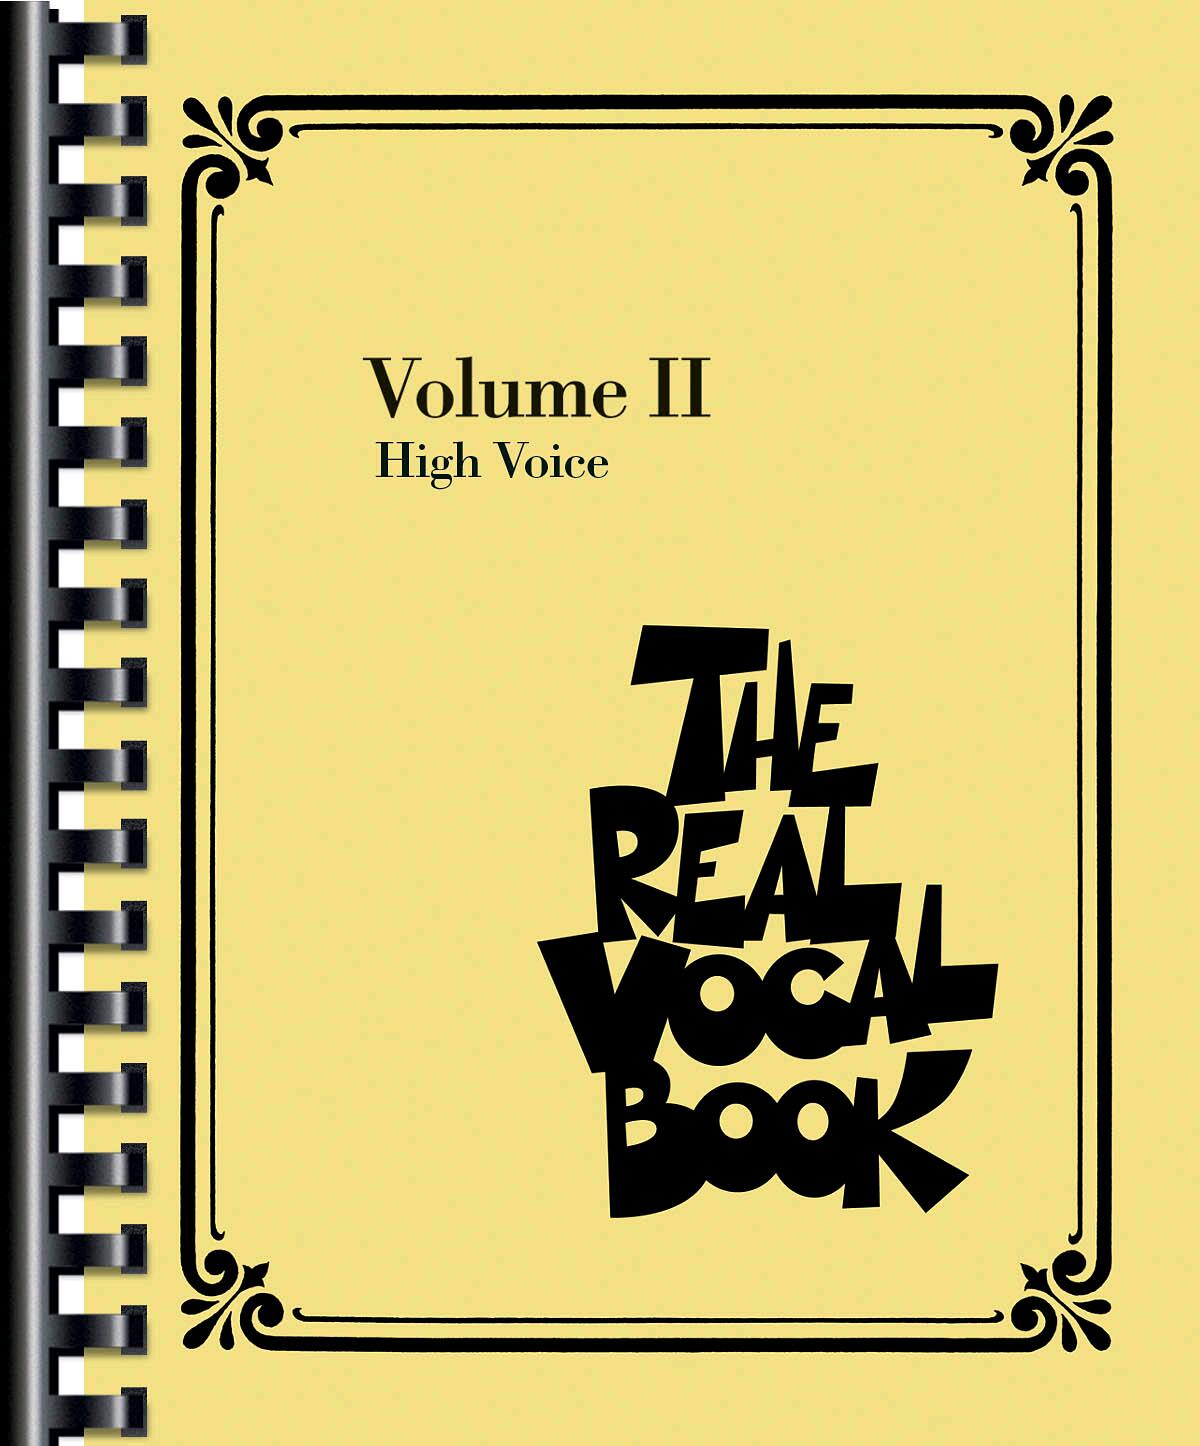 The Real Vocal Book Volume 2 high voice : photo 1